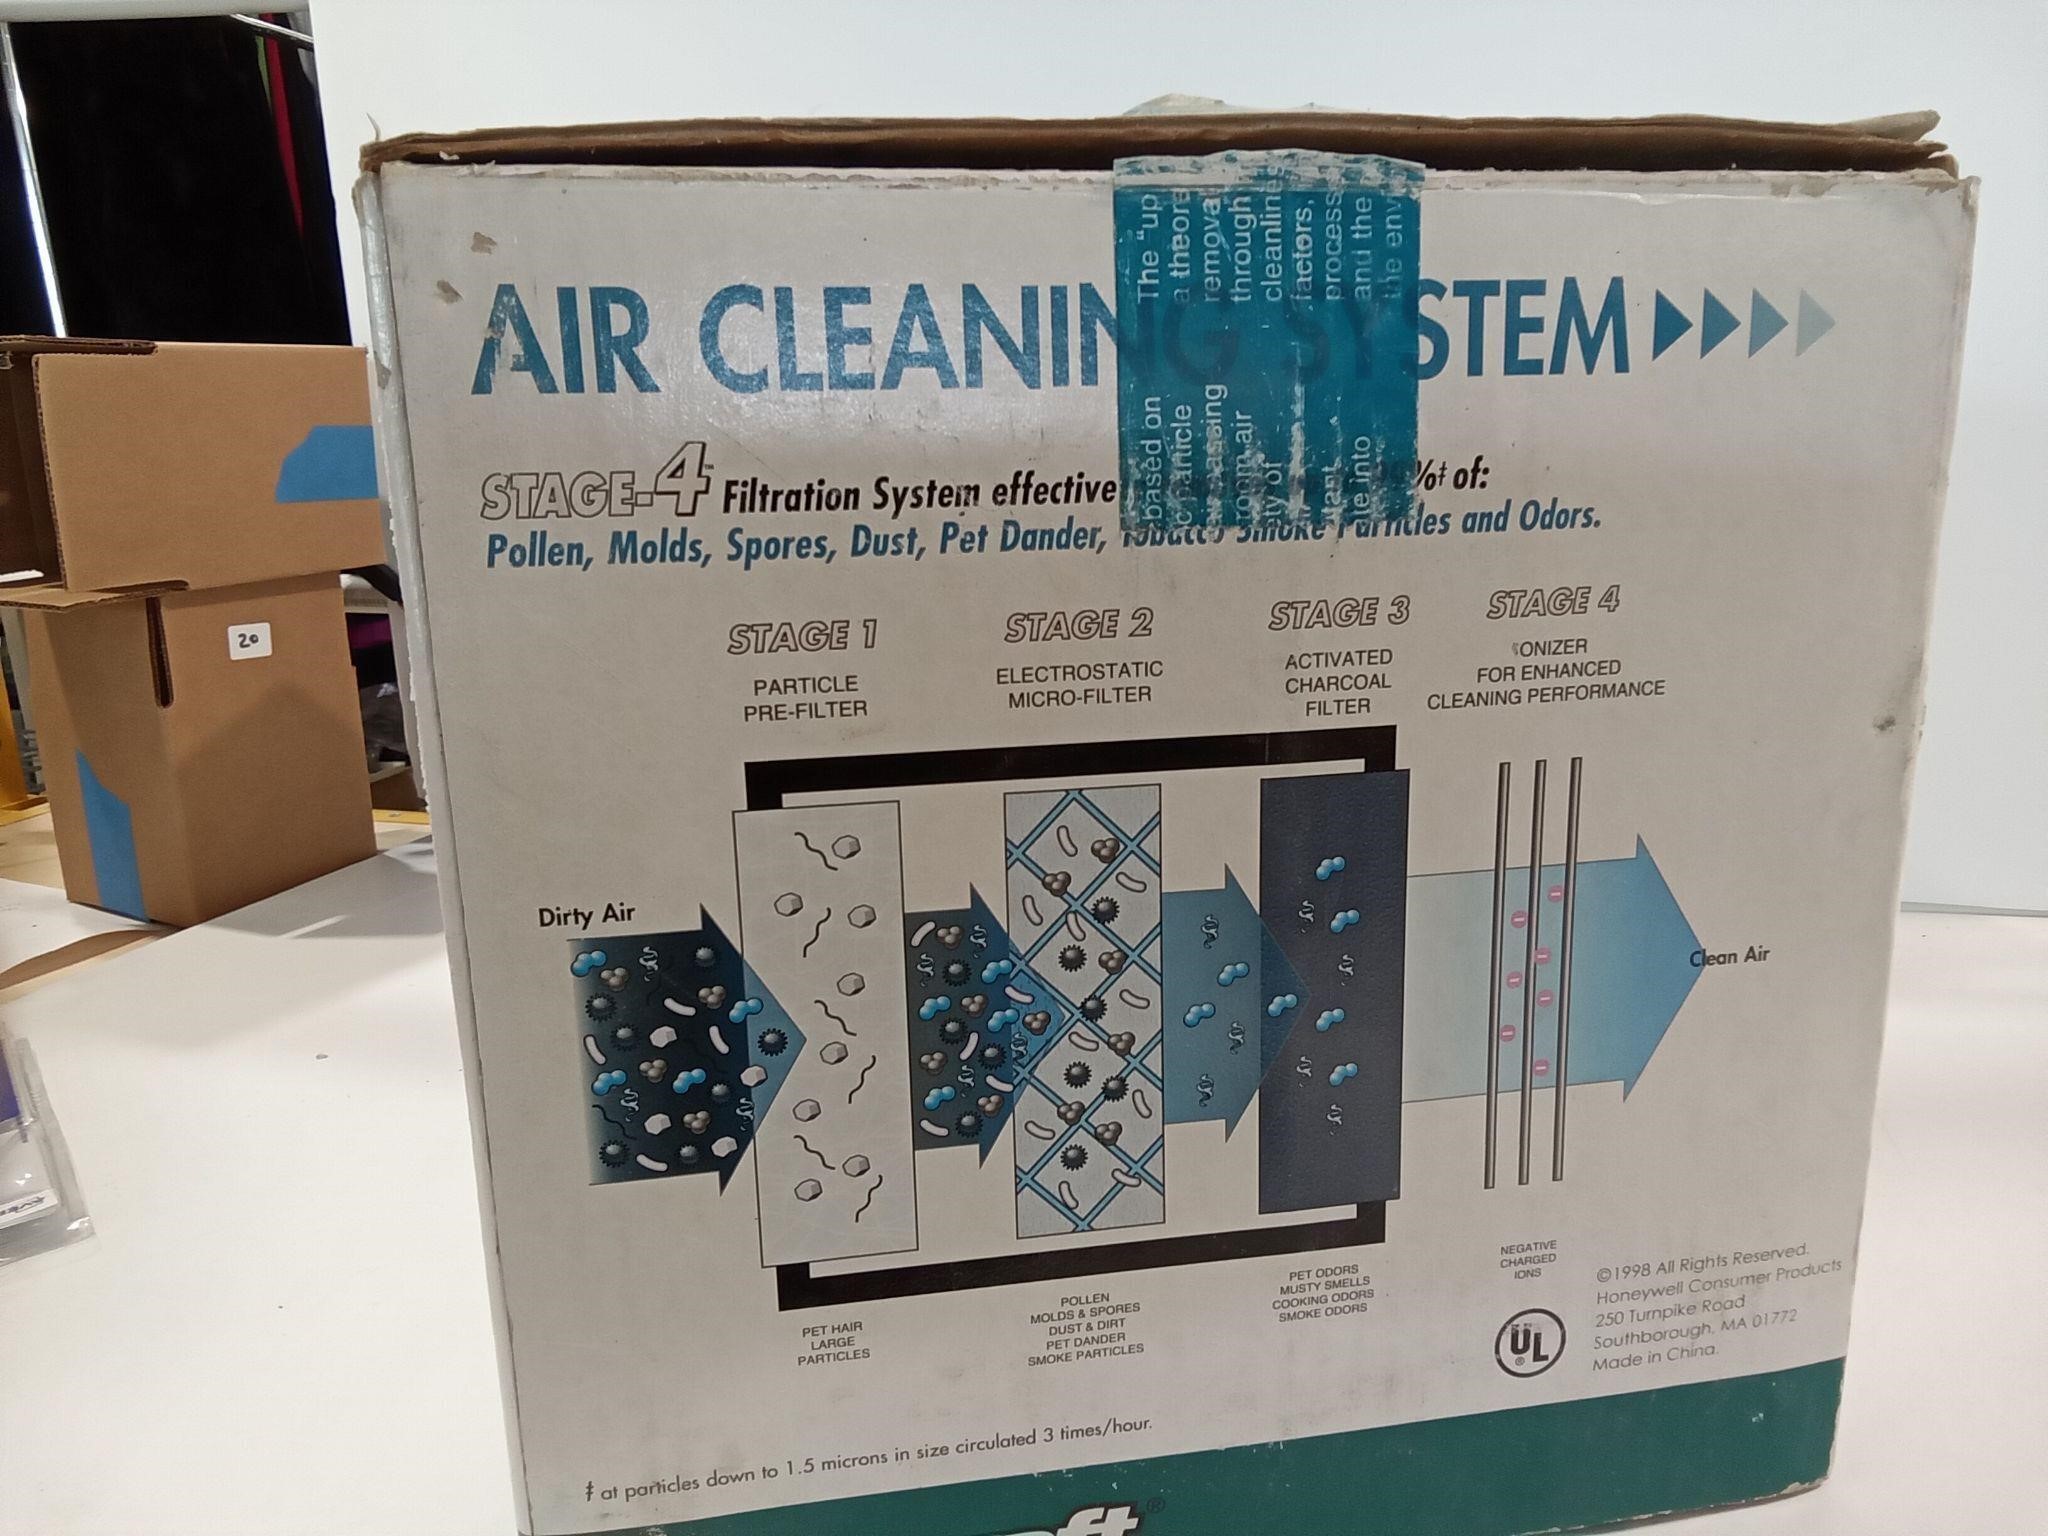 Duracraft Air Cleaning System